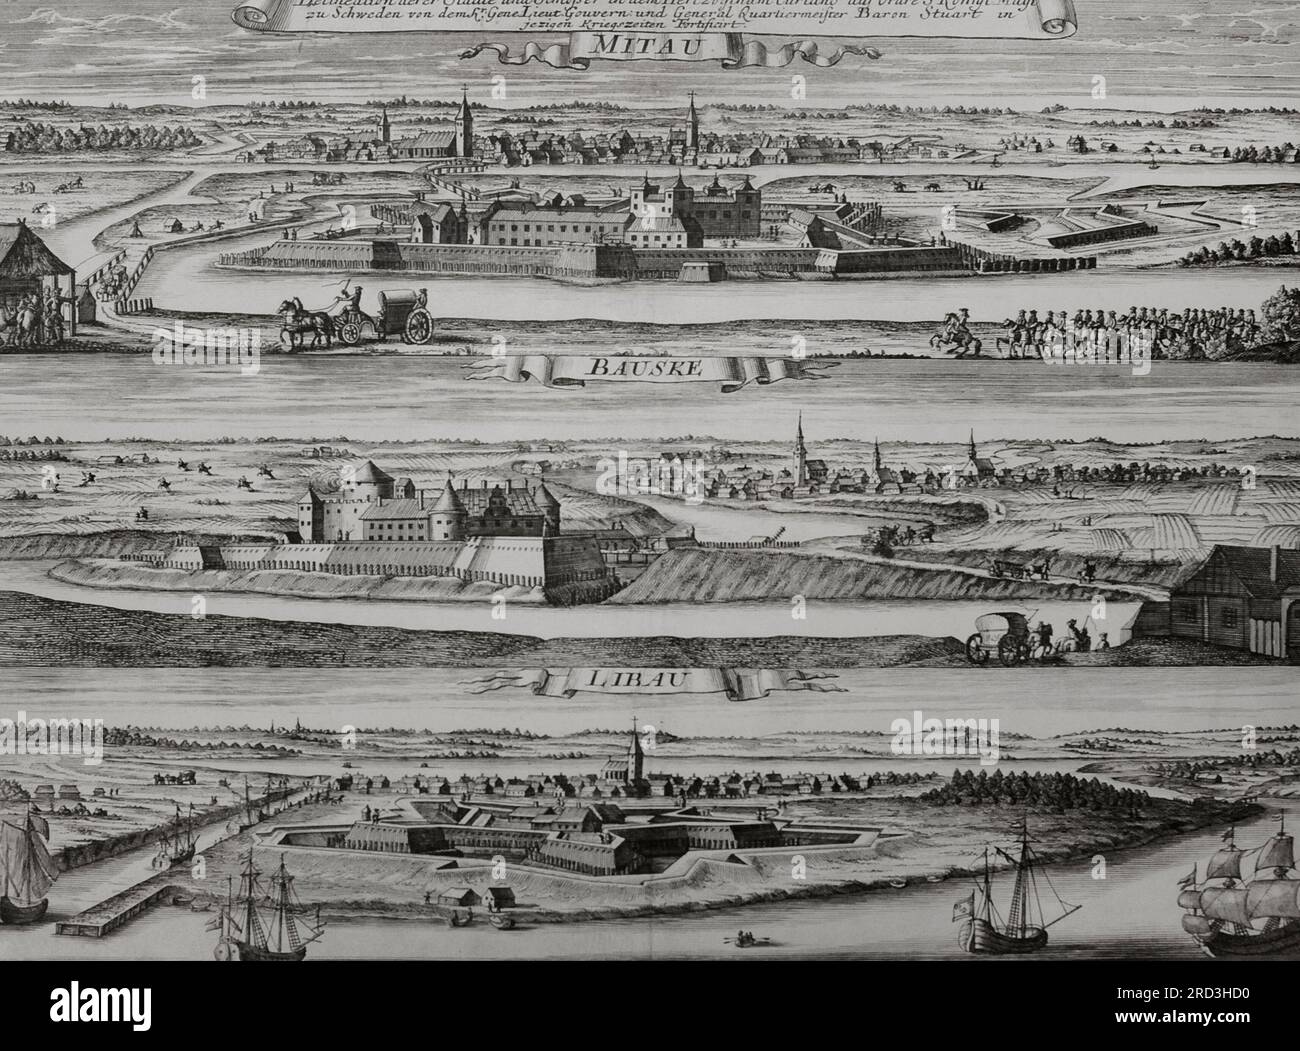 History of Latvia. From top to bottom: fortifications of Jelgava, Bauska and Liepaja during the Great Northern War (1700-1721). The governor of Courland, Baron Karl Magnus Stuart (1650-1705) reinforced the fortifications of the towns of Courland. Engraving, early 18th century. Stock Photo